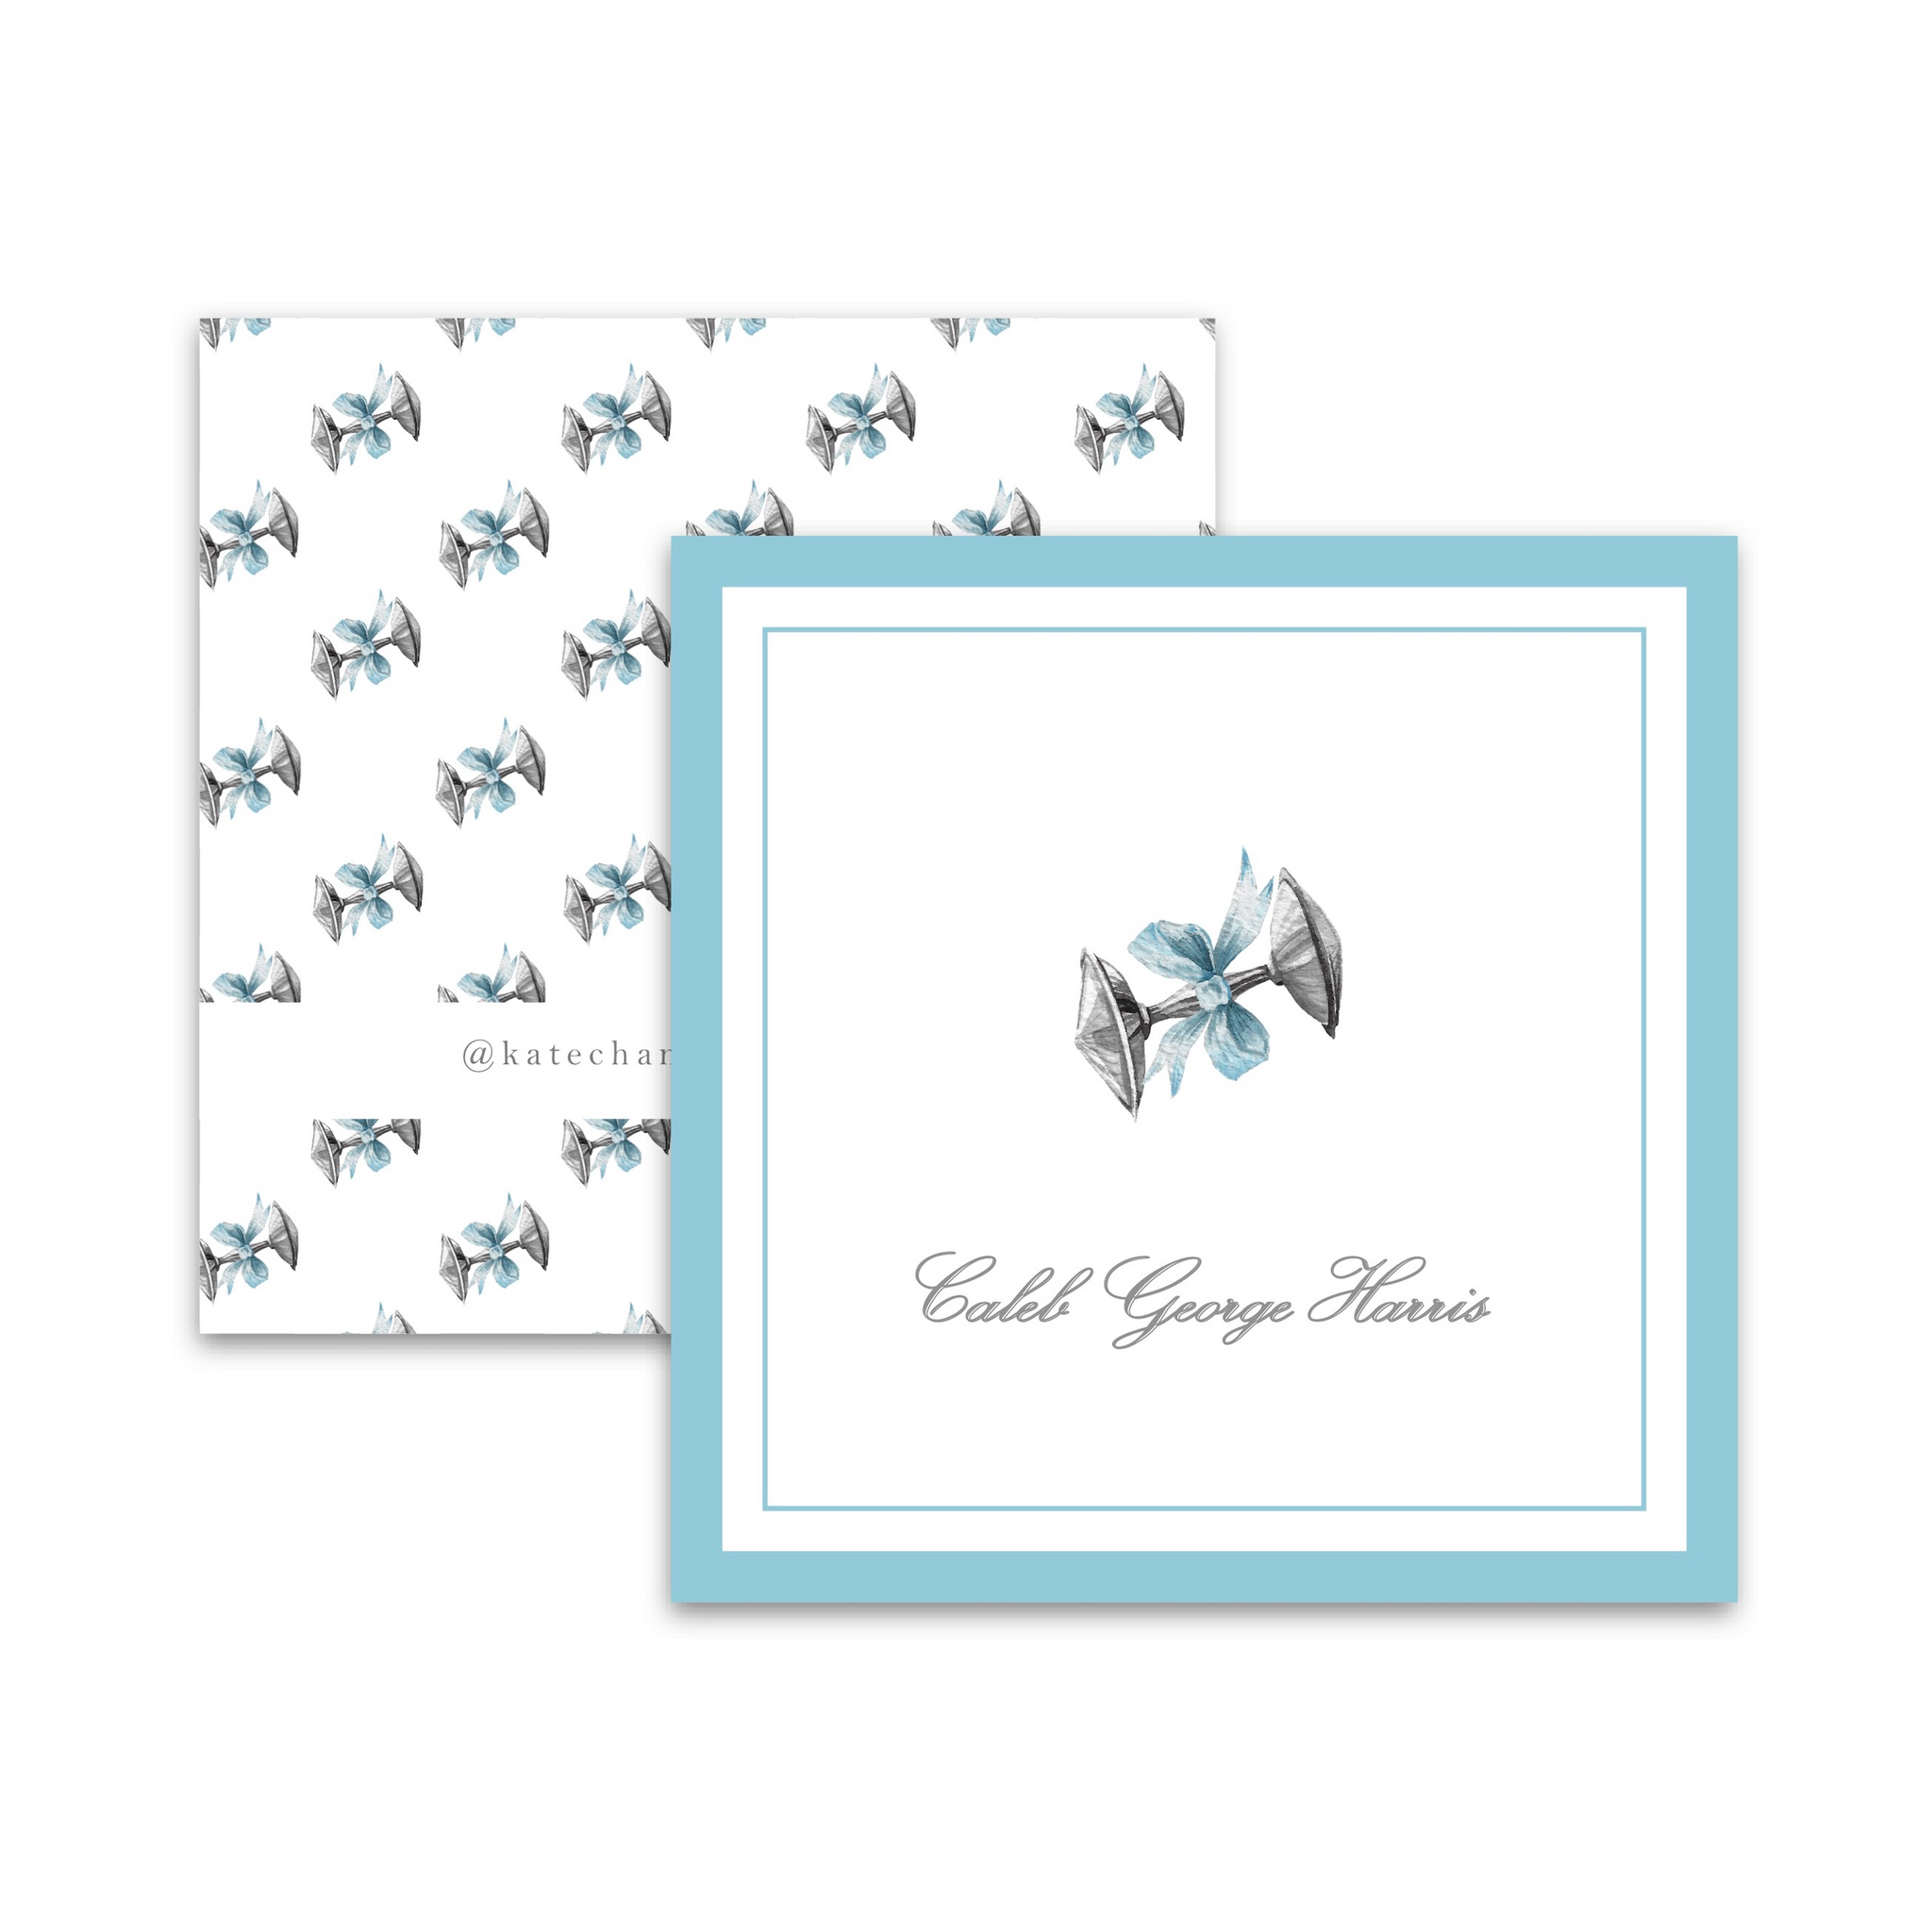 Silver Rattle with Blue Ribbon Square Enclosure Card